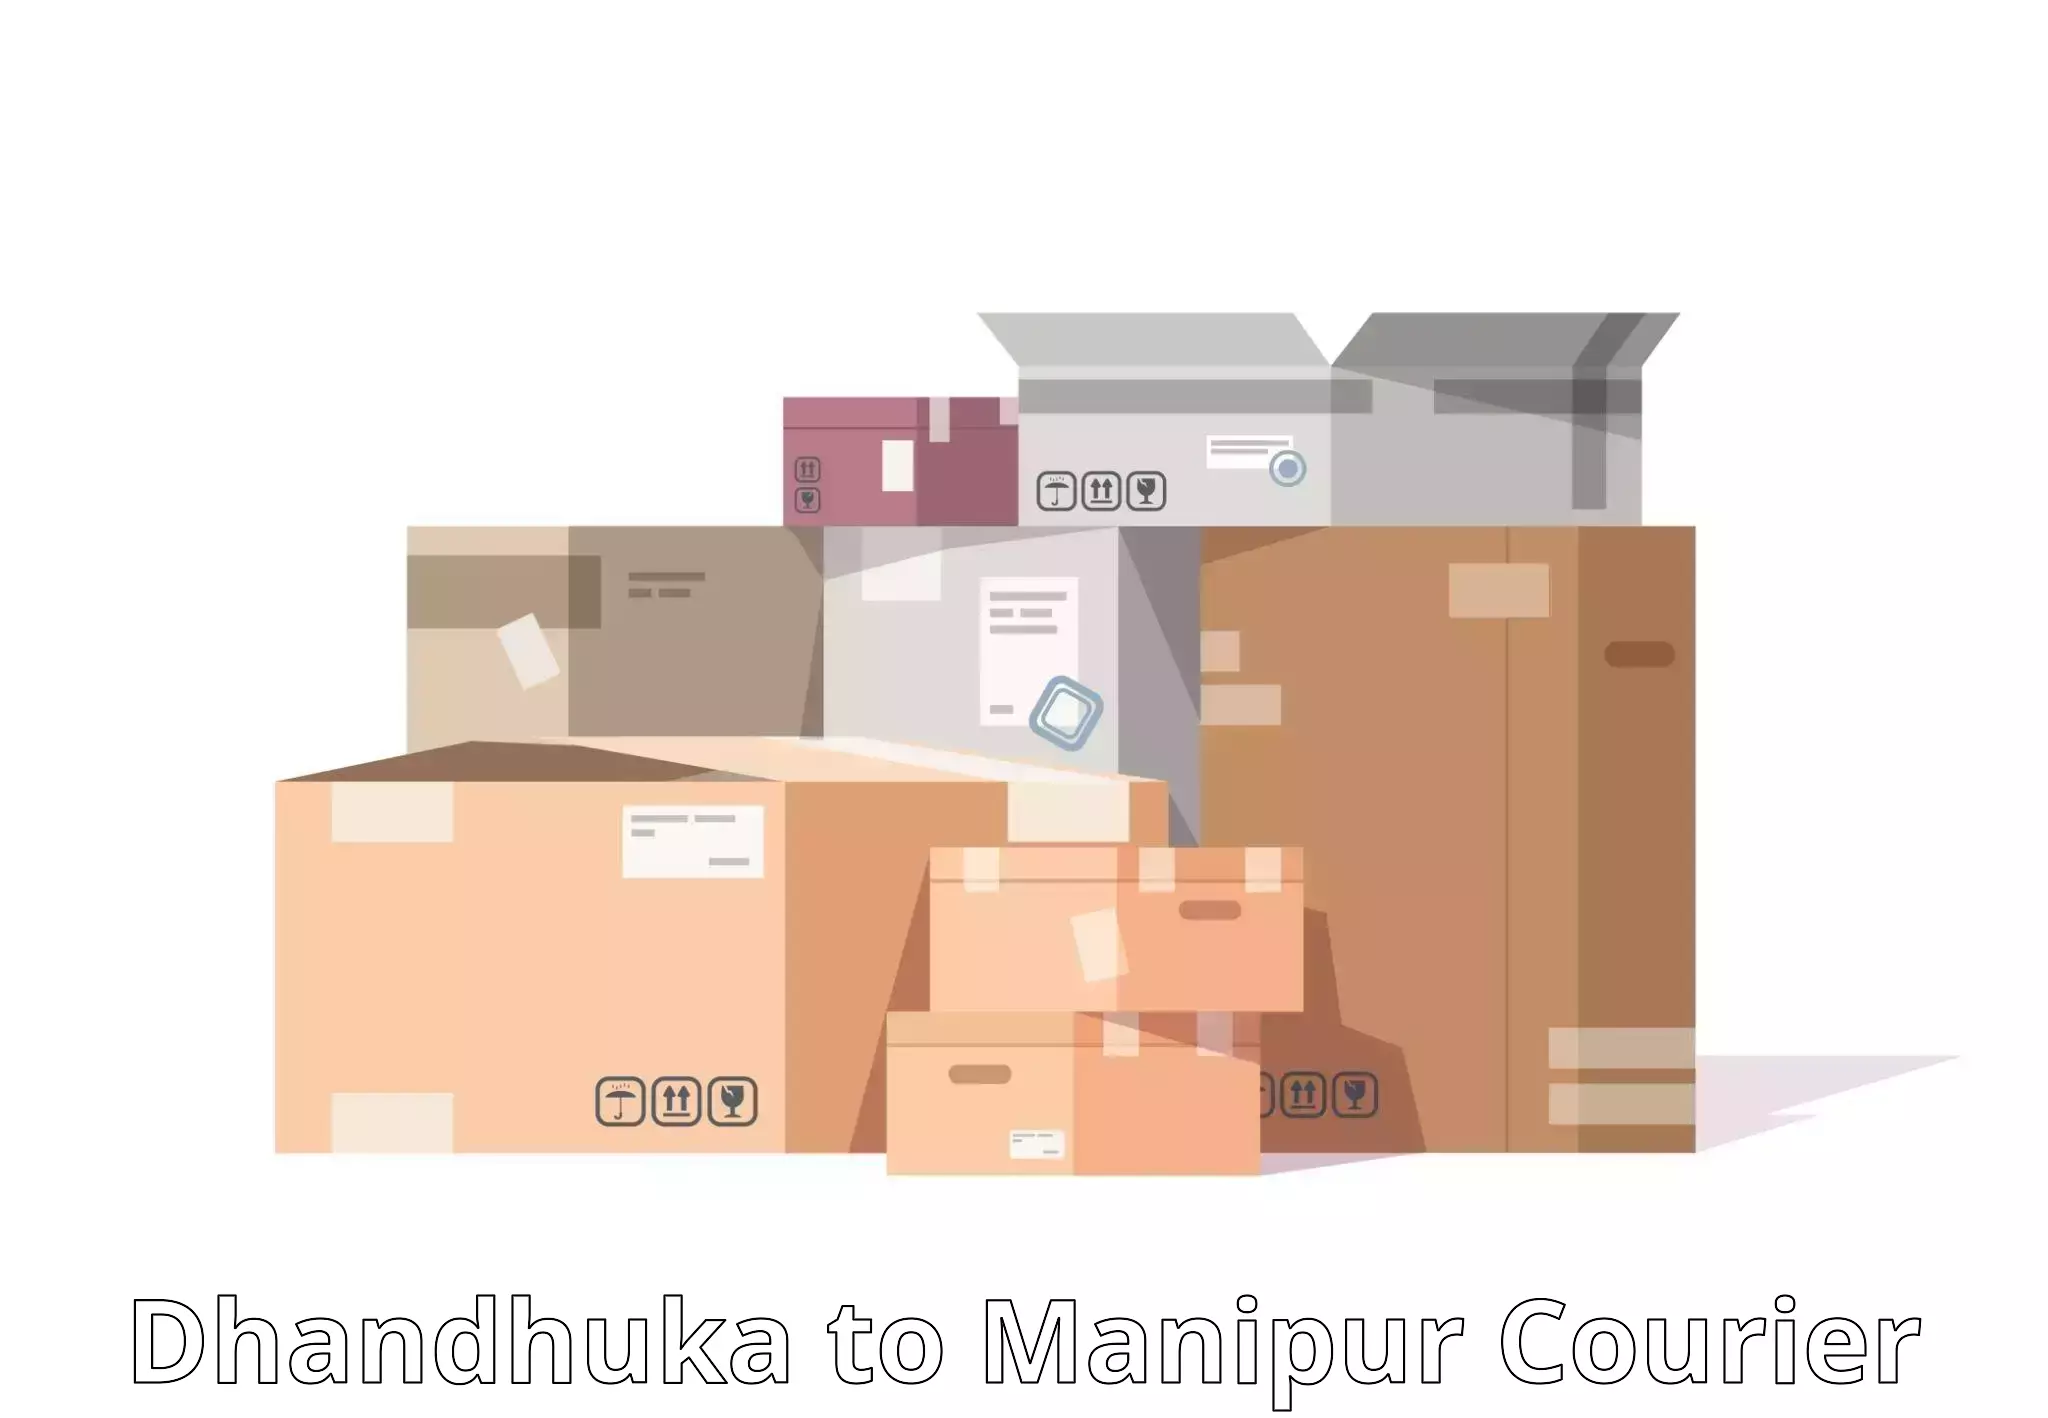 Doorstep delivery service Dhandhuka to Manipur